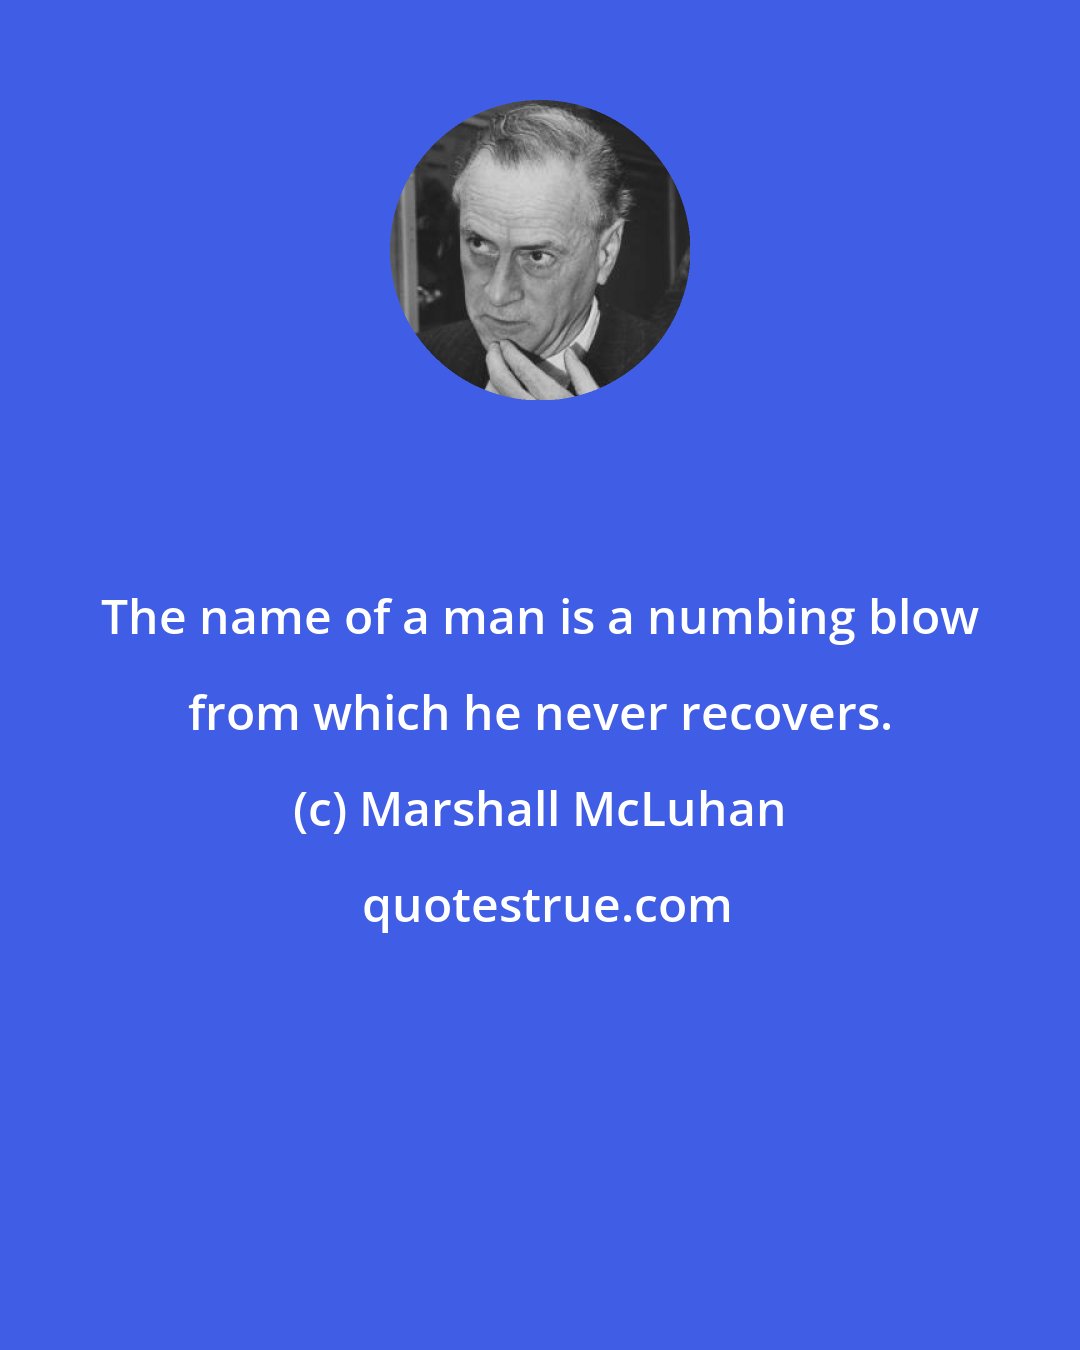 Marshall McLuhan: The name of a man is a numbing blow from which he never recovers.